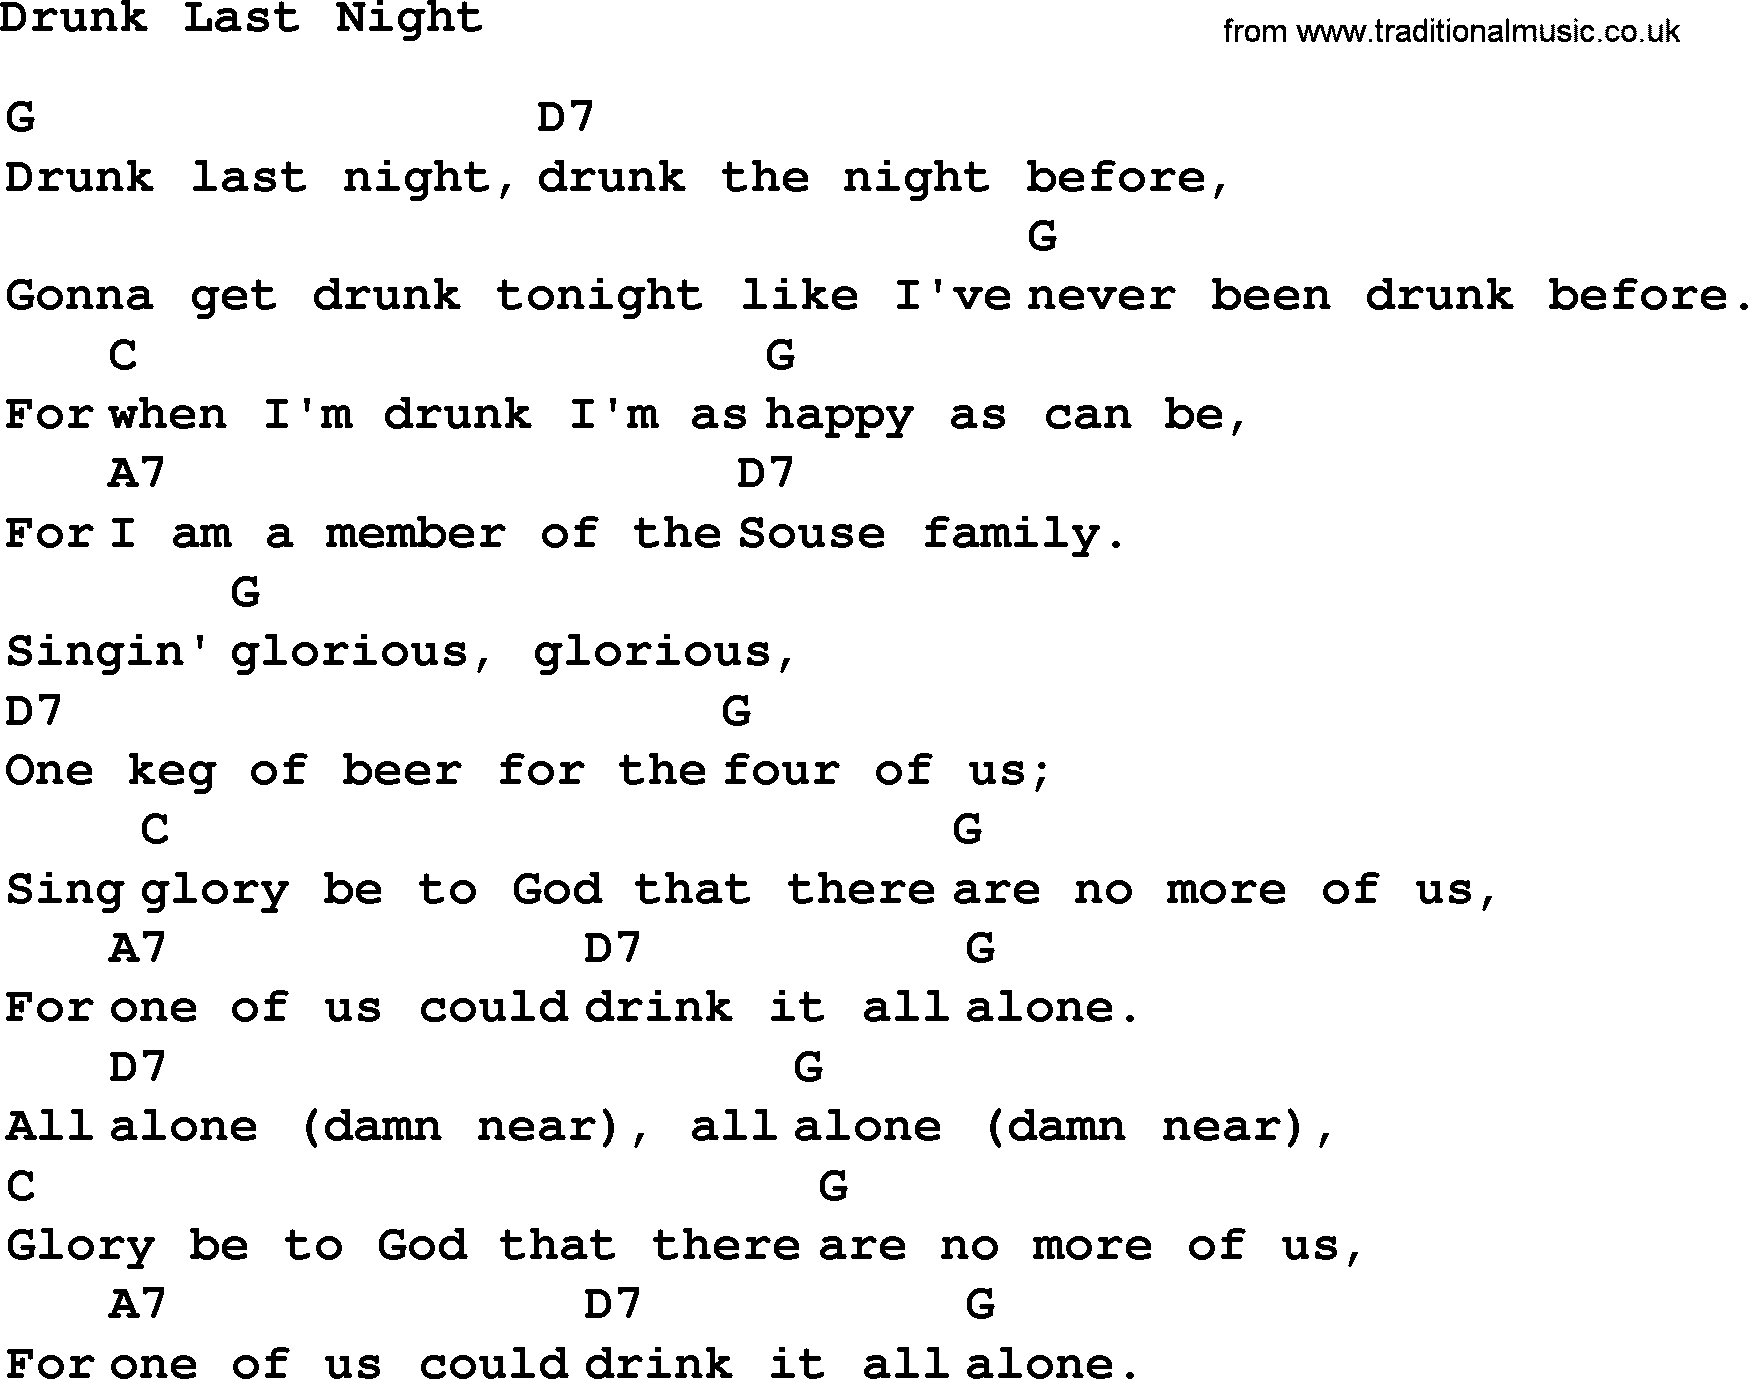 Top 1000 Most Popular Folk and Old-time Songs: Drunk Last Night, lyrics and chords